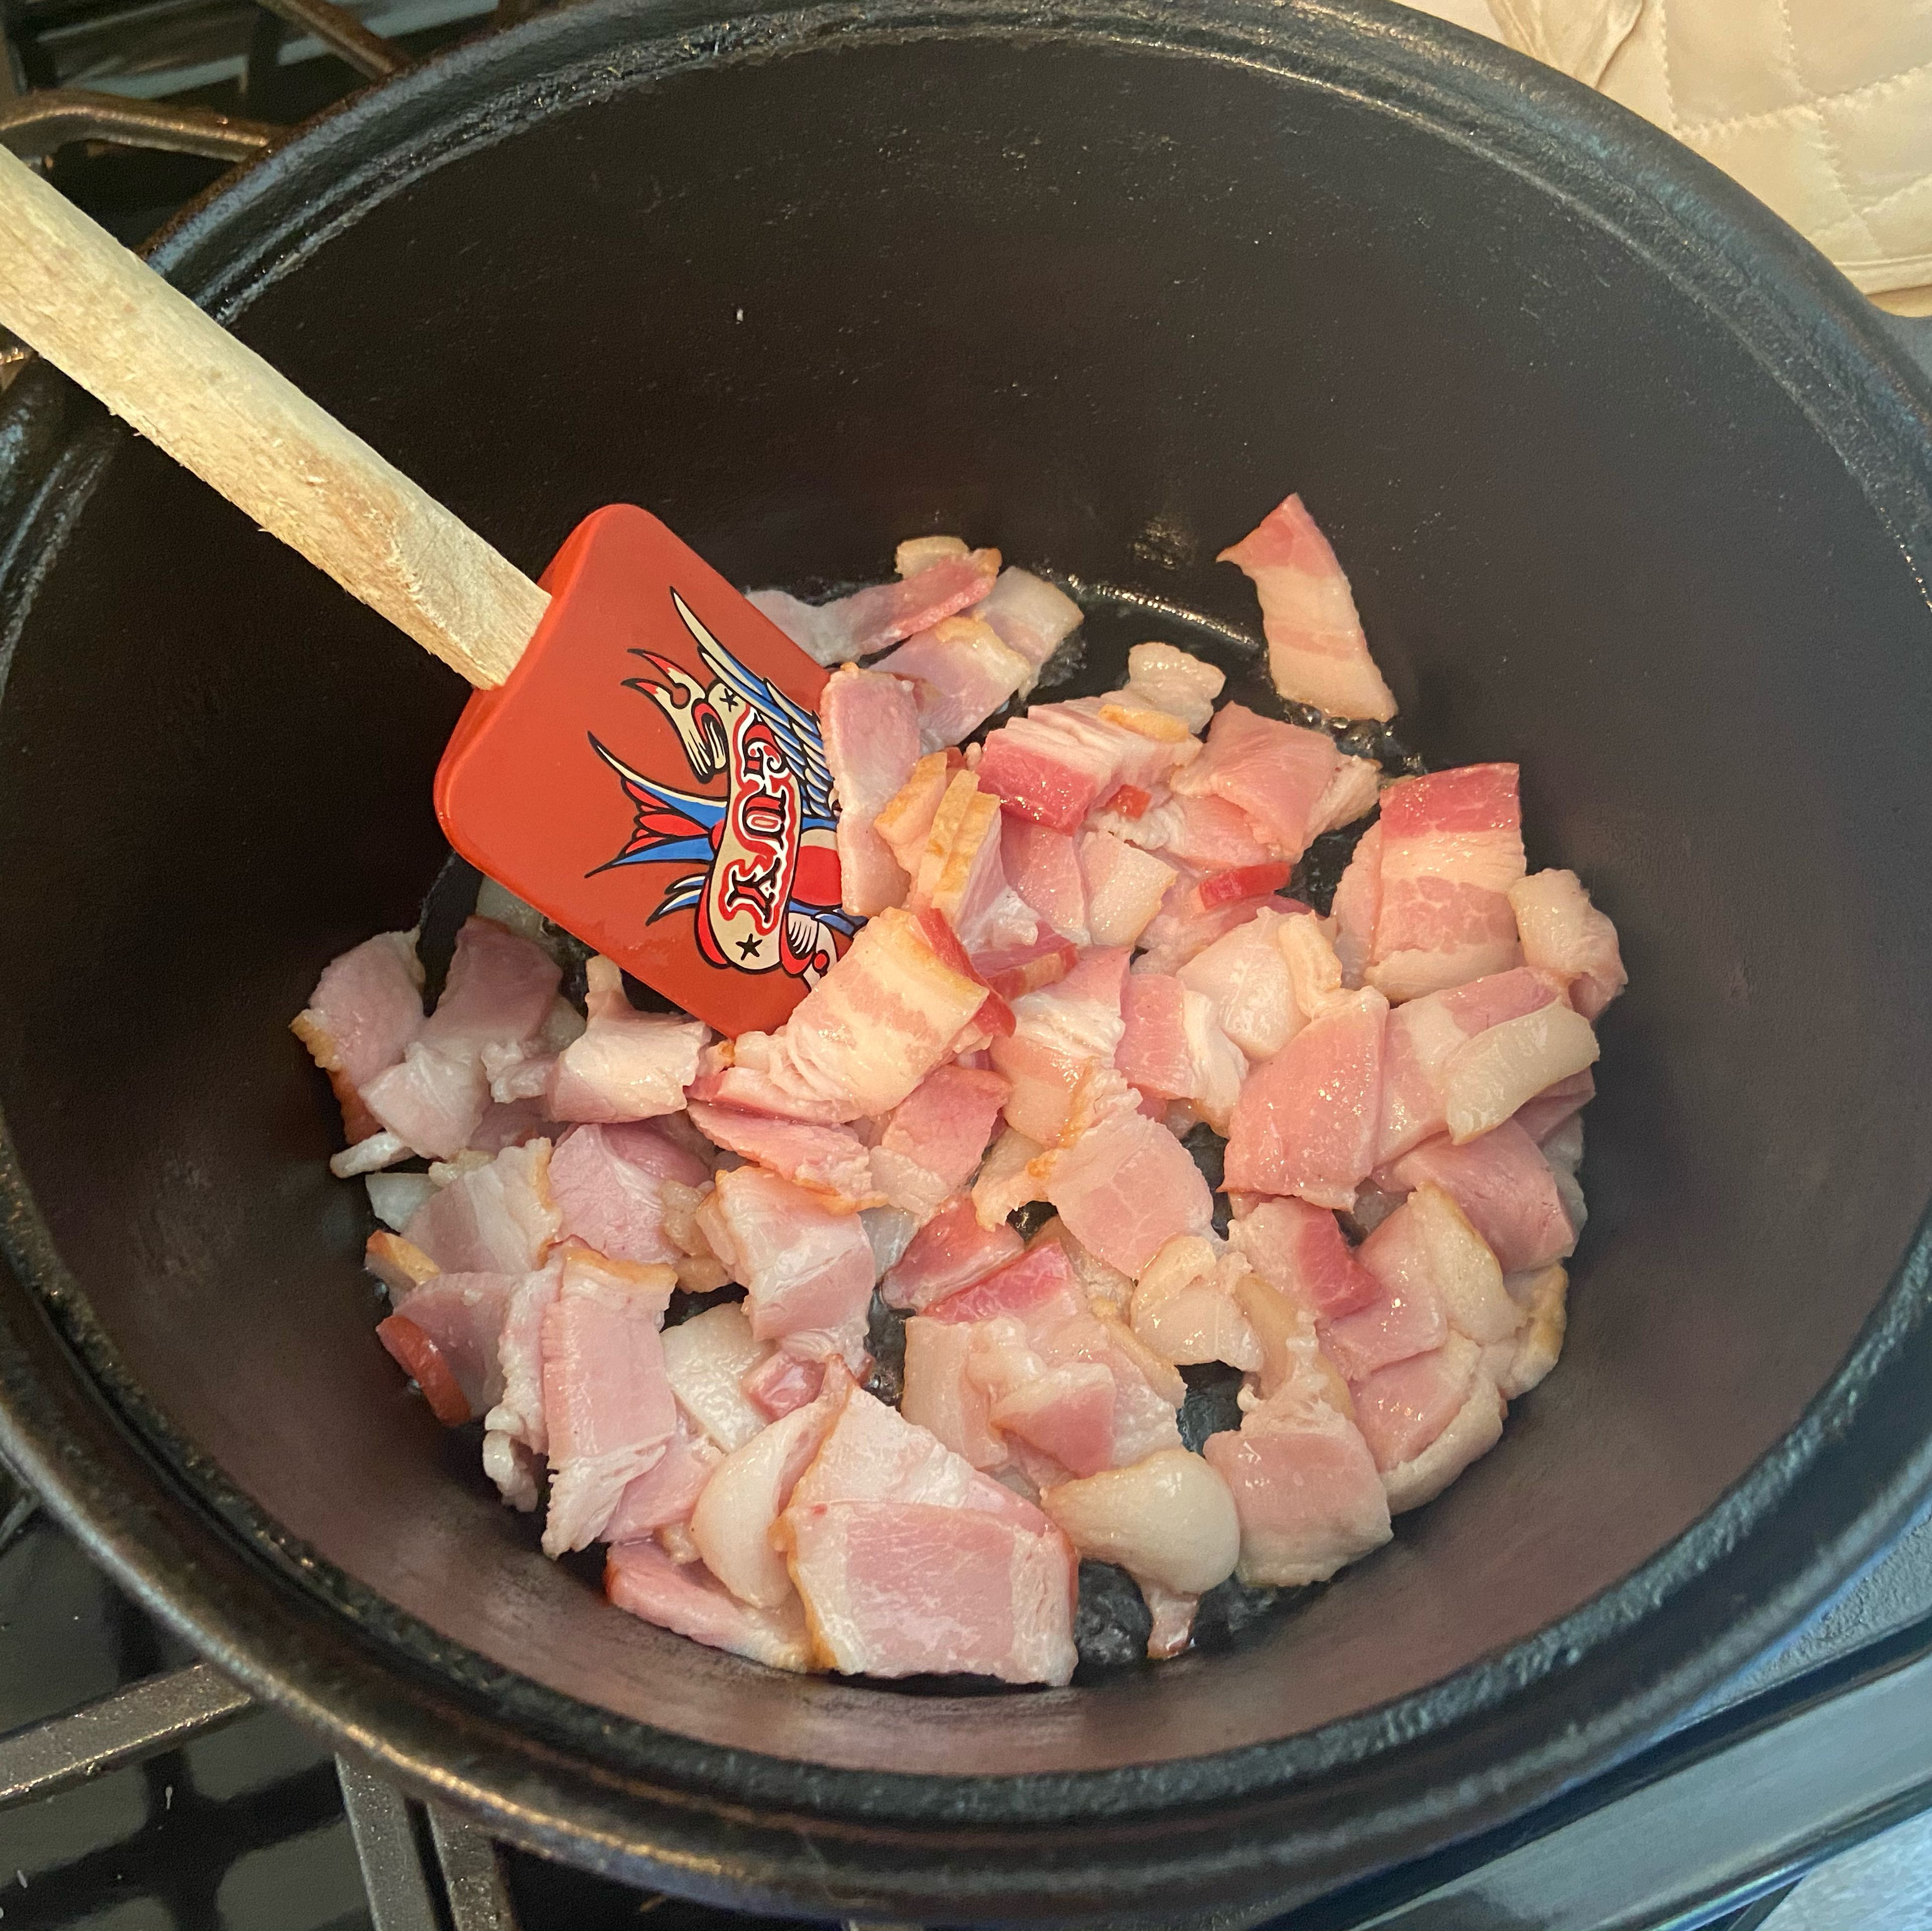 Cut the bacon into half inch chunks and then brown in a heavy bottomed pan, I like using my cast-iron Dutch oven.￼ we recently returned from a mini vacation to Alabama where I picked up bacon and several packages of smoked sausage from Conecuh Sausage Co. And I’m using half of the bacon in this recipe so it’s my first time trying it but you can use whatever your favorite baking is.￼￼